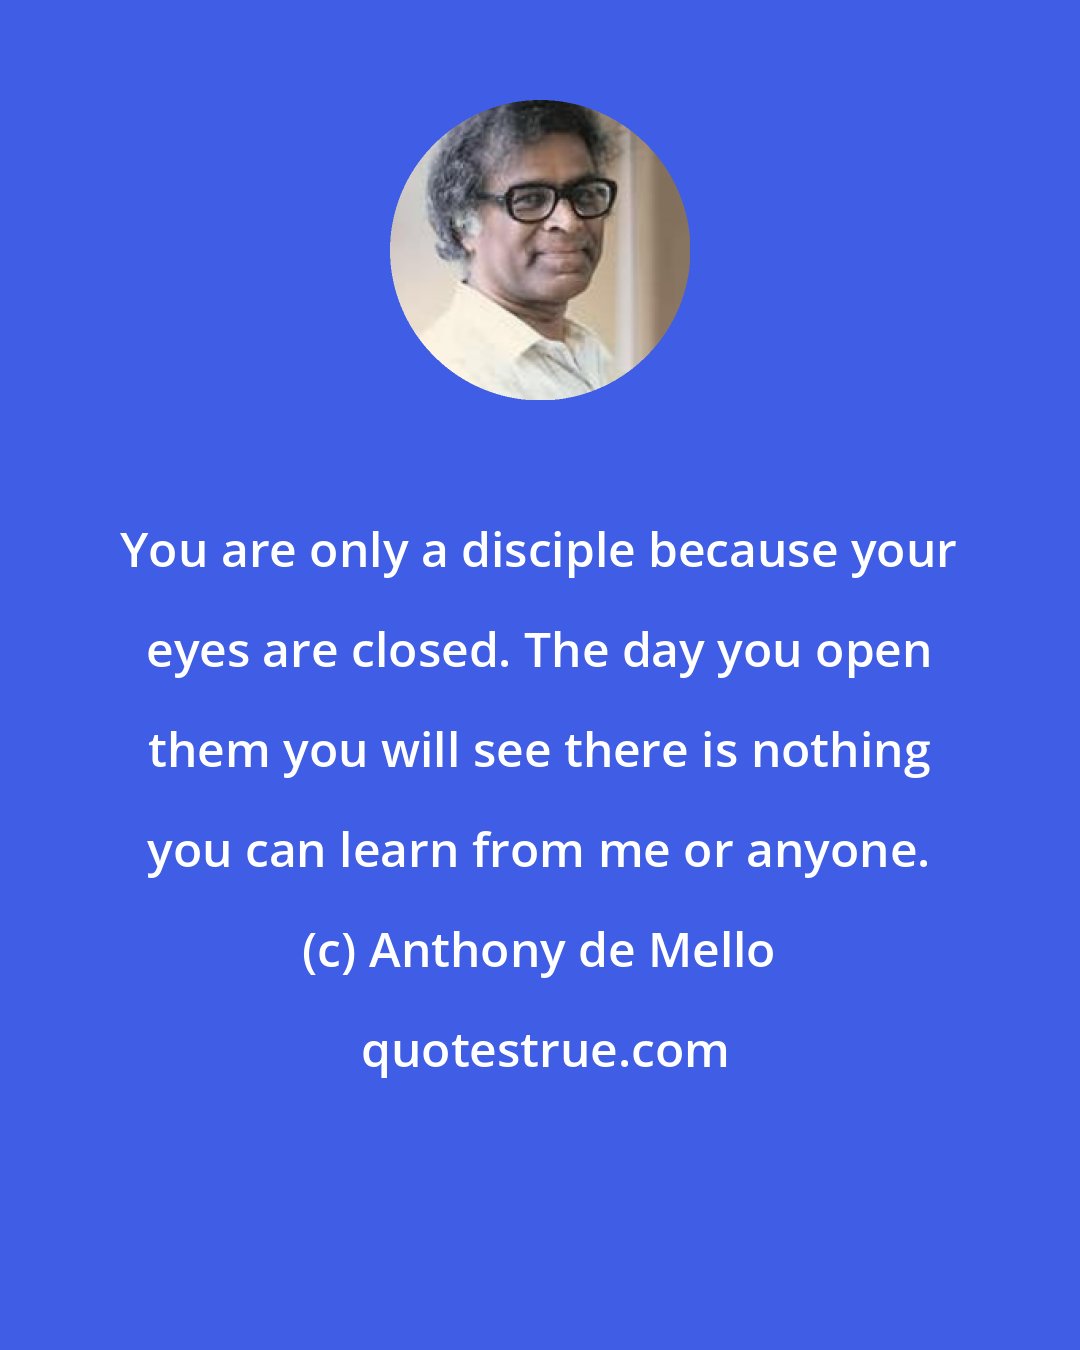 Anthony de Mello: You are only a disciple because your eyes are closed. The day you open them you will see there is nothing you can learn from me or anyone.